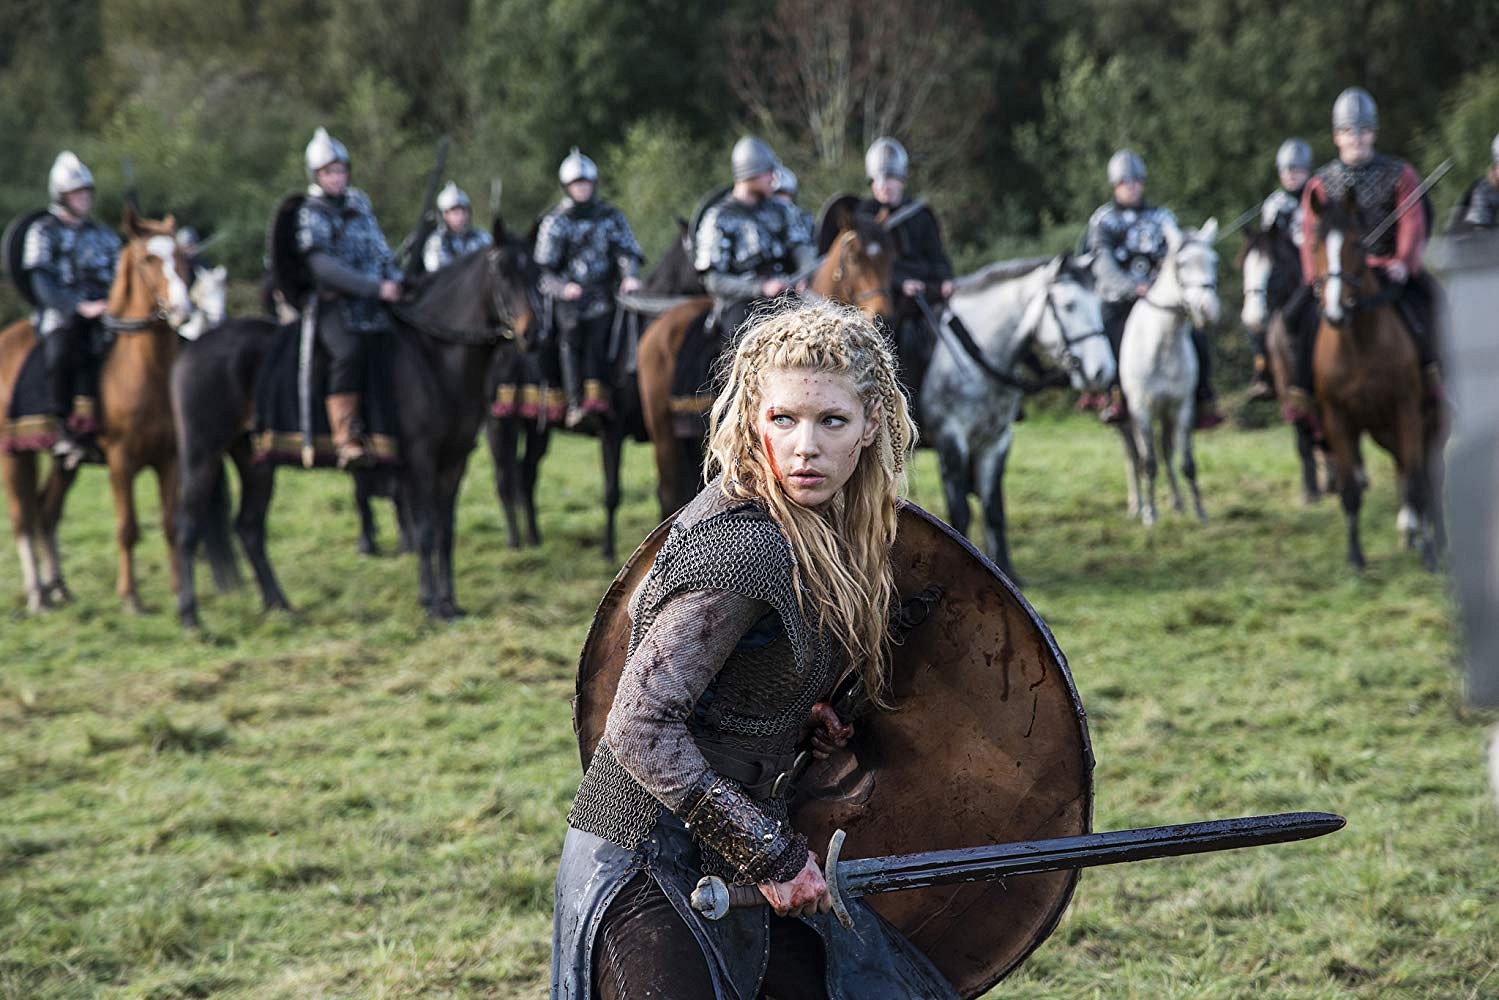 Vikings on HISTORY on Instagram: “Lagertha taught Porunn well! Double tap  if you think the young shield maiden killed i…